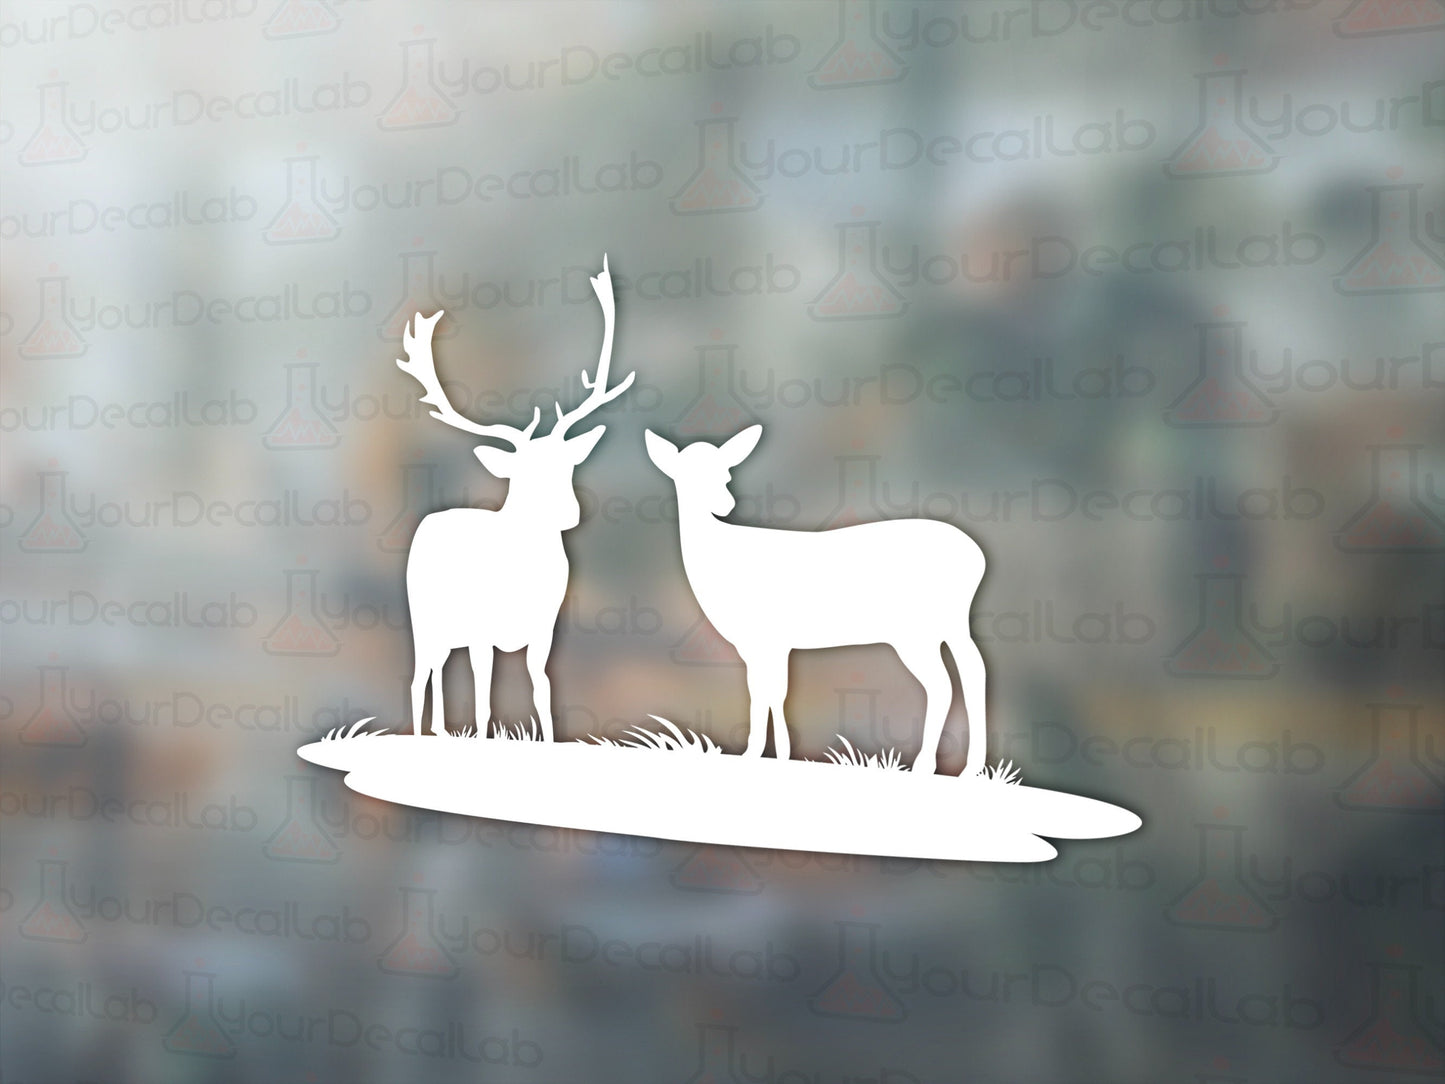 Standing Deer Decal - Many Colors & Sizes